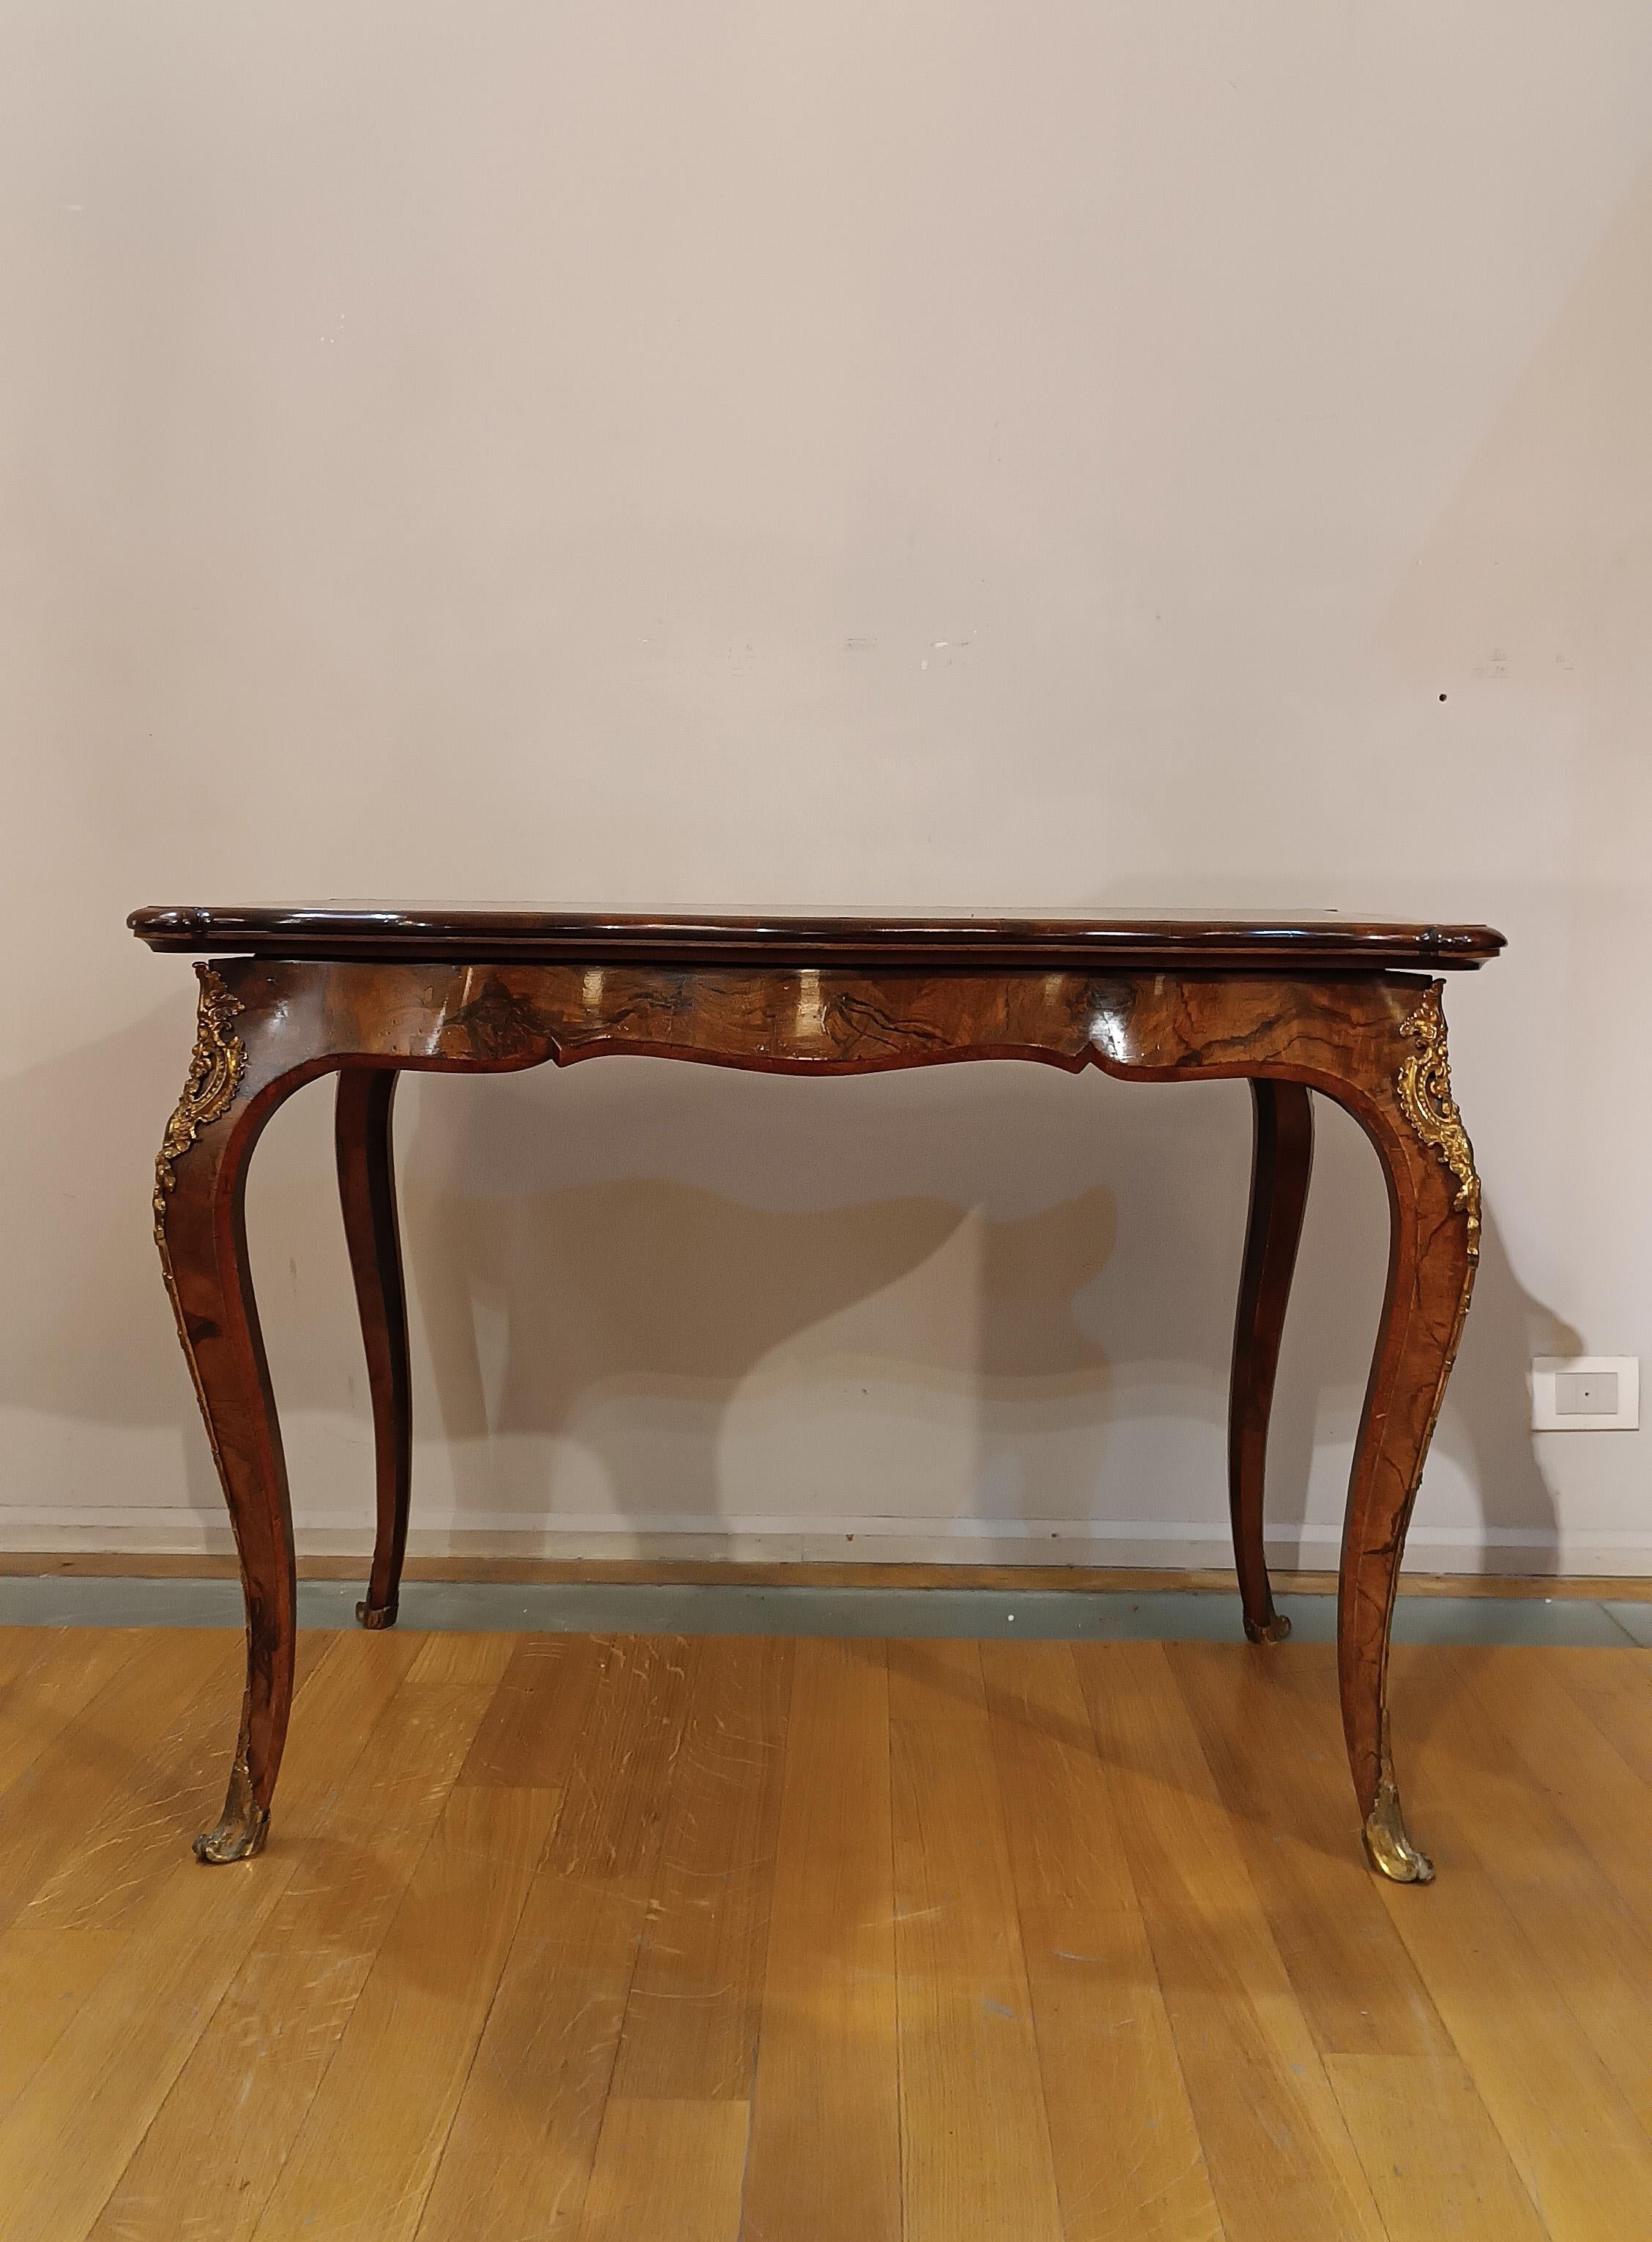 Elegant French card table, dating back to the first half of the 19th century (ca. 1820-1840), characterized by wavy legs typical of the Louis Philippe style. Made of fine walnut, this center table easily transforms into a large game table. The top